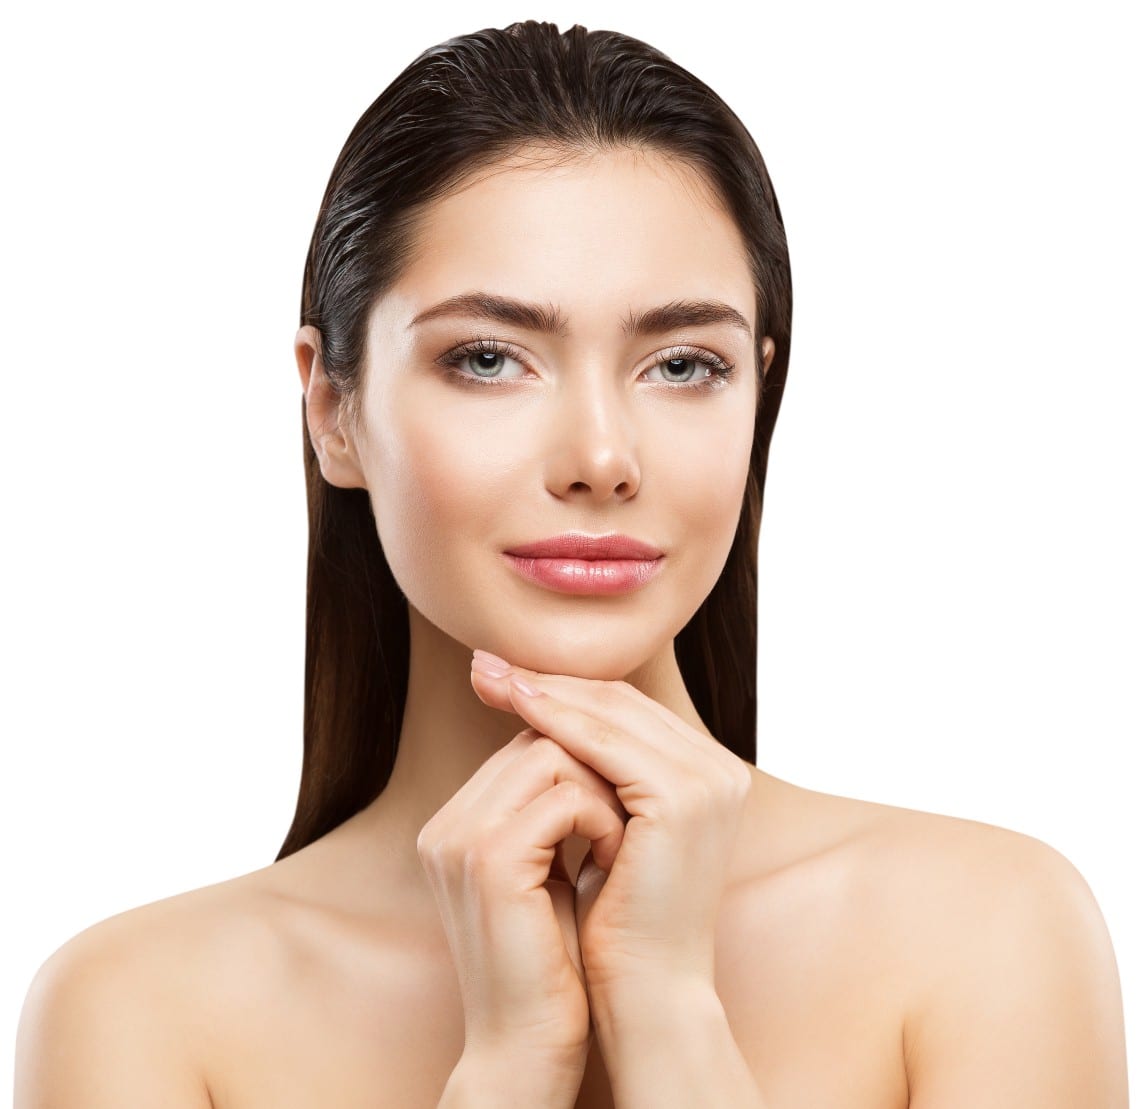 Women after Kybella - aesthetic treatment of jowls, injection of deoxycholic acid| Bellava Aesthetics in Crestview Hills, KY